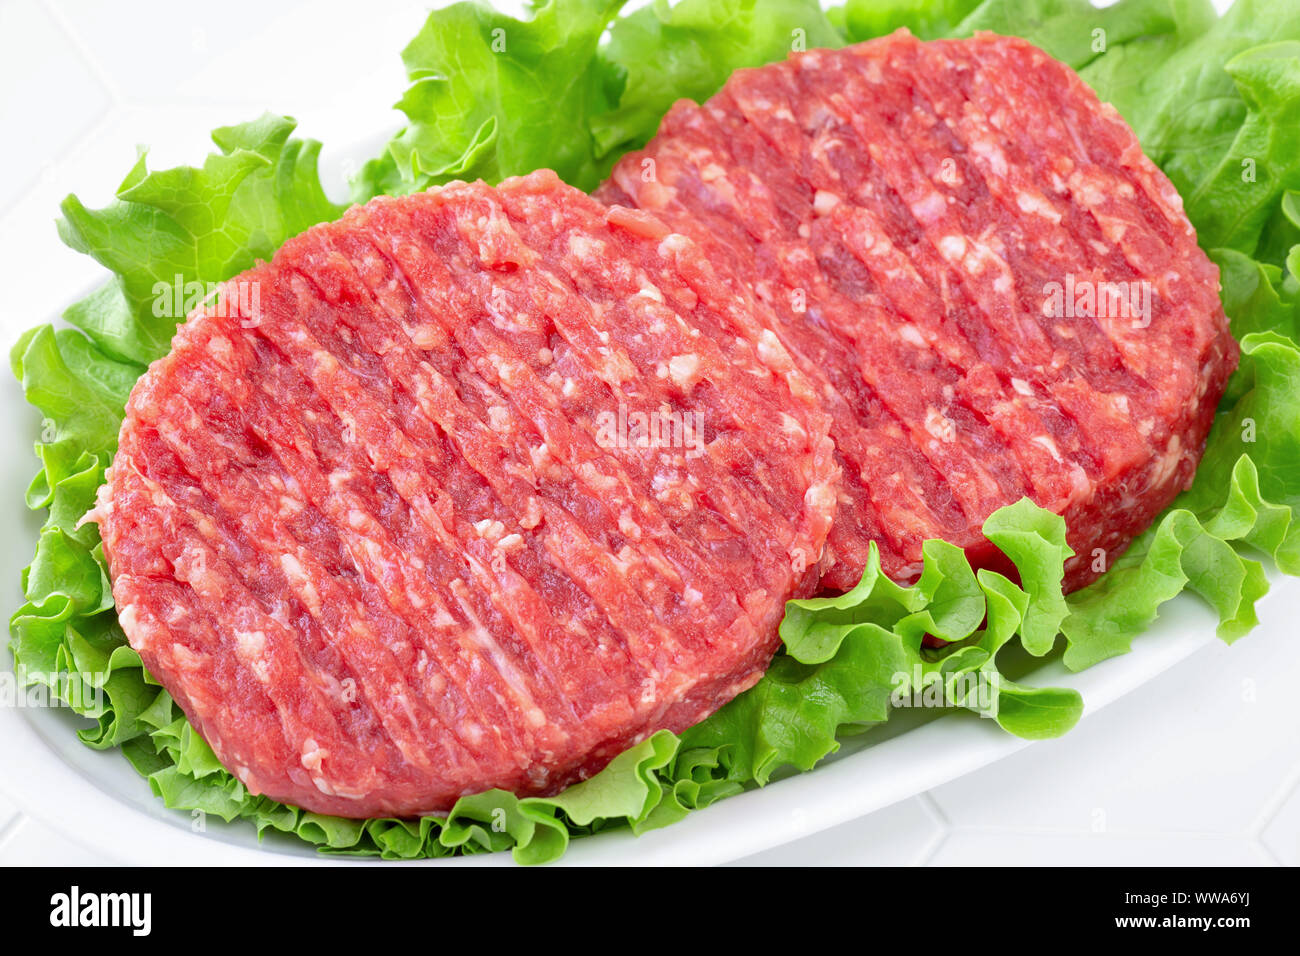 Raw mince meat beef burgers on a white plate with lettuce leaves Stock Photo